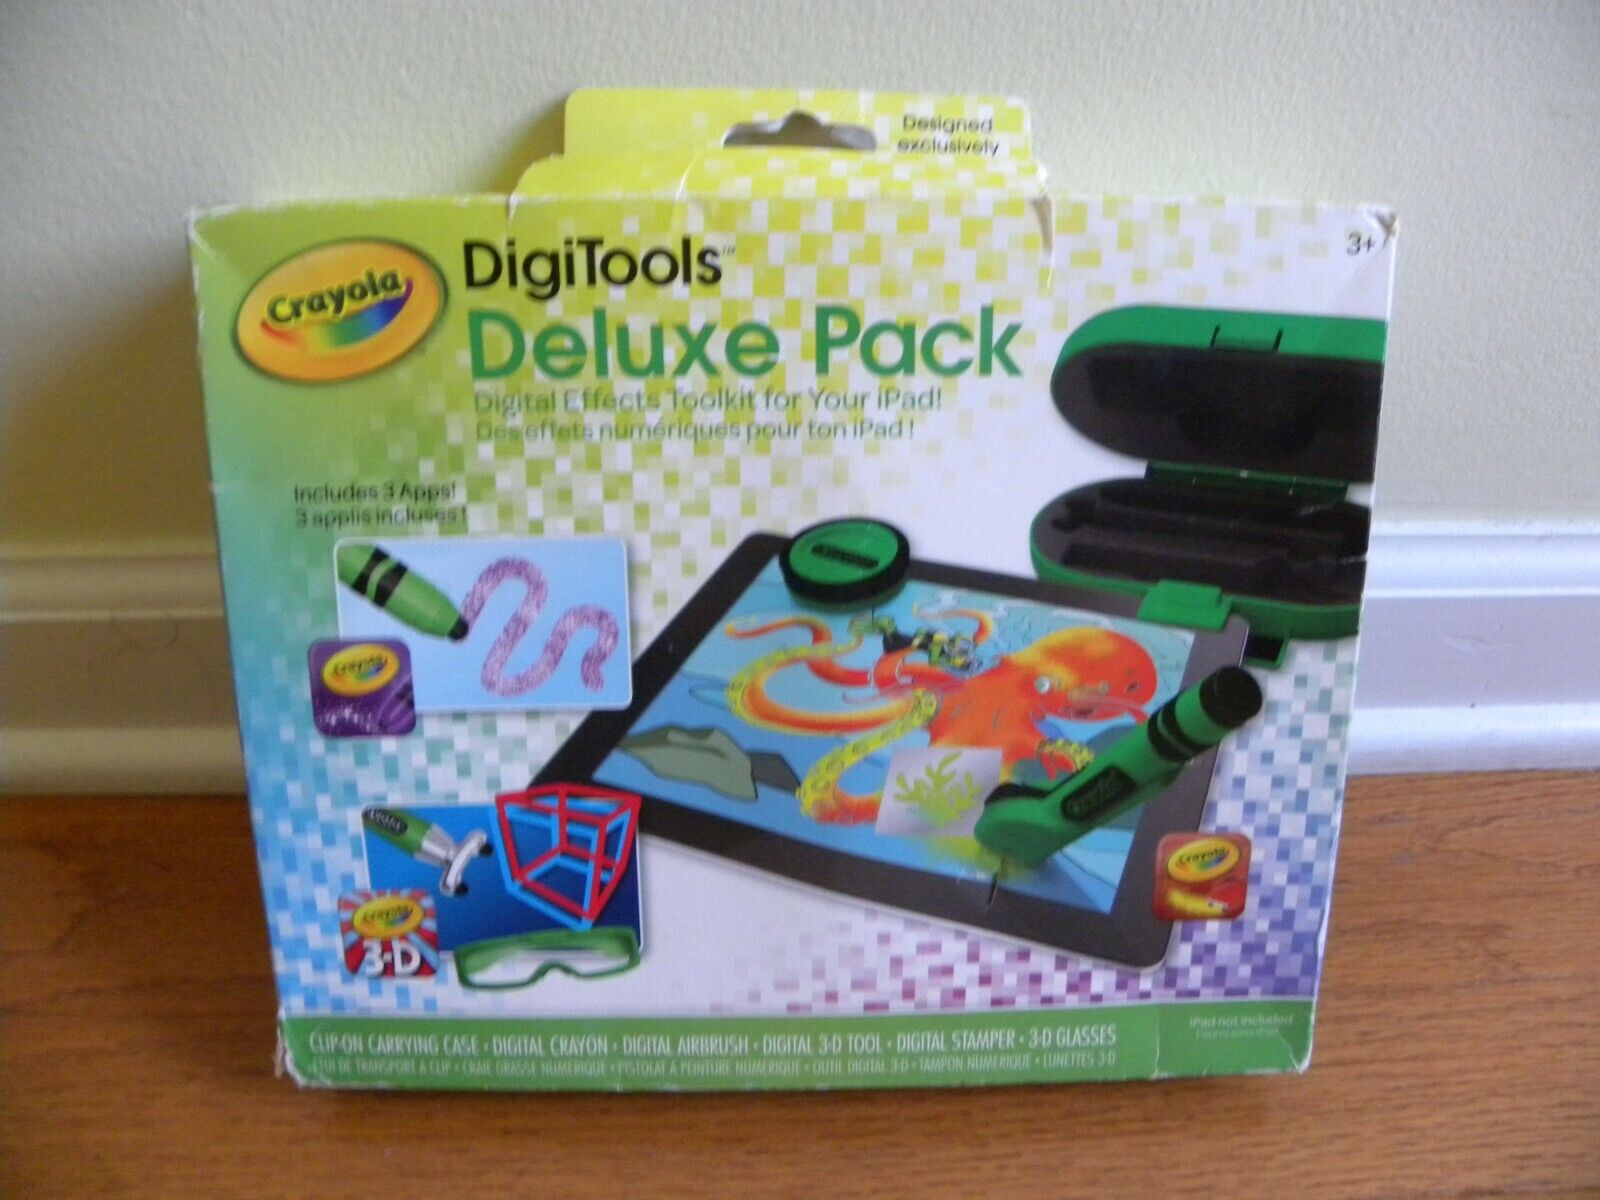 Crayola DigiTools Deluxe Pack 3in1 Toolkit Exclusively For iPad - NEW  SEALED